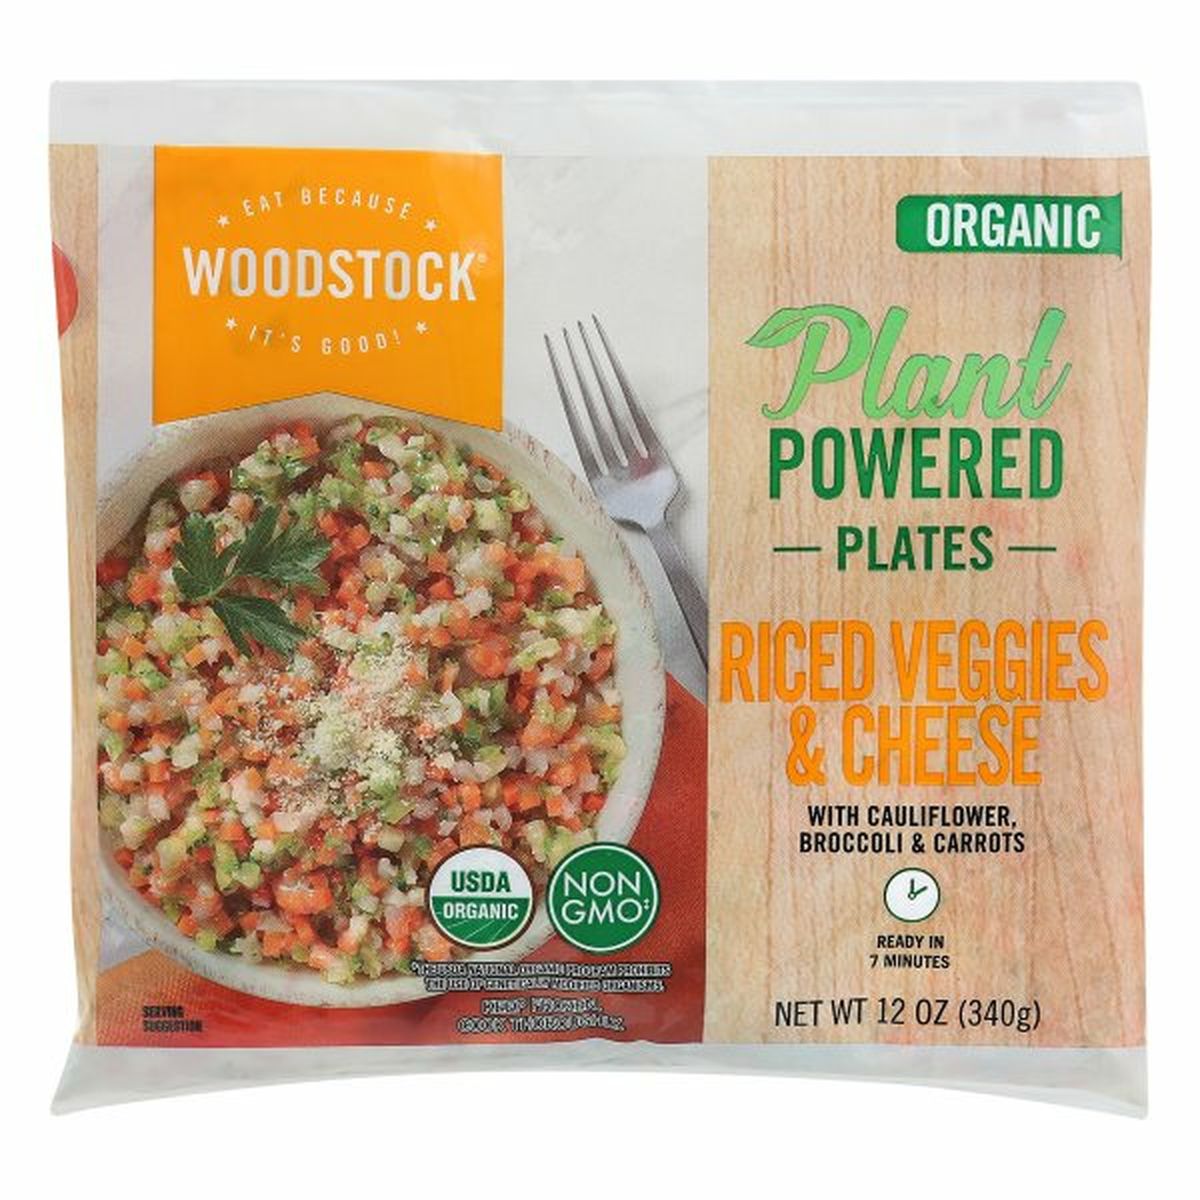 Calories in WOODSTOCK Riced Veggies & Cheese, Organic, With Cauliflower, Broccoli & Carrots, Plant Powered Plates